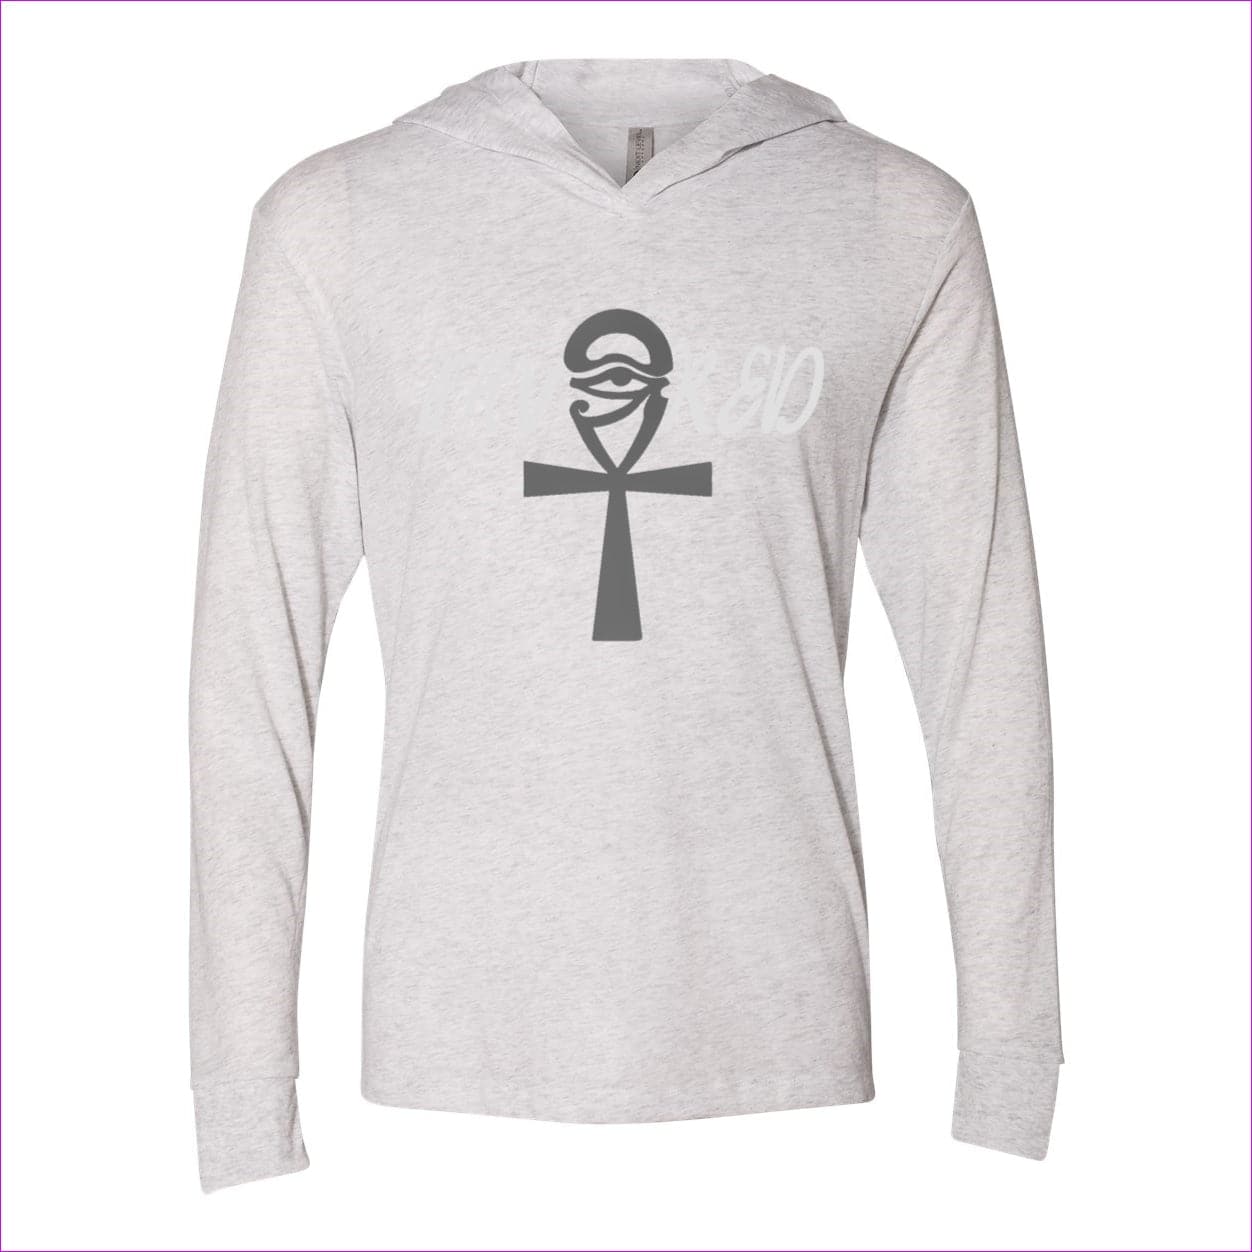 Heather White - Favored Womens Triblend Hooded Tee - womens hoodie at TFC&H Co.